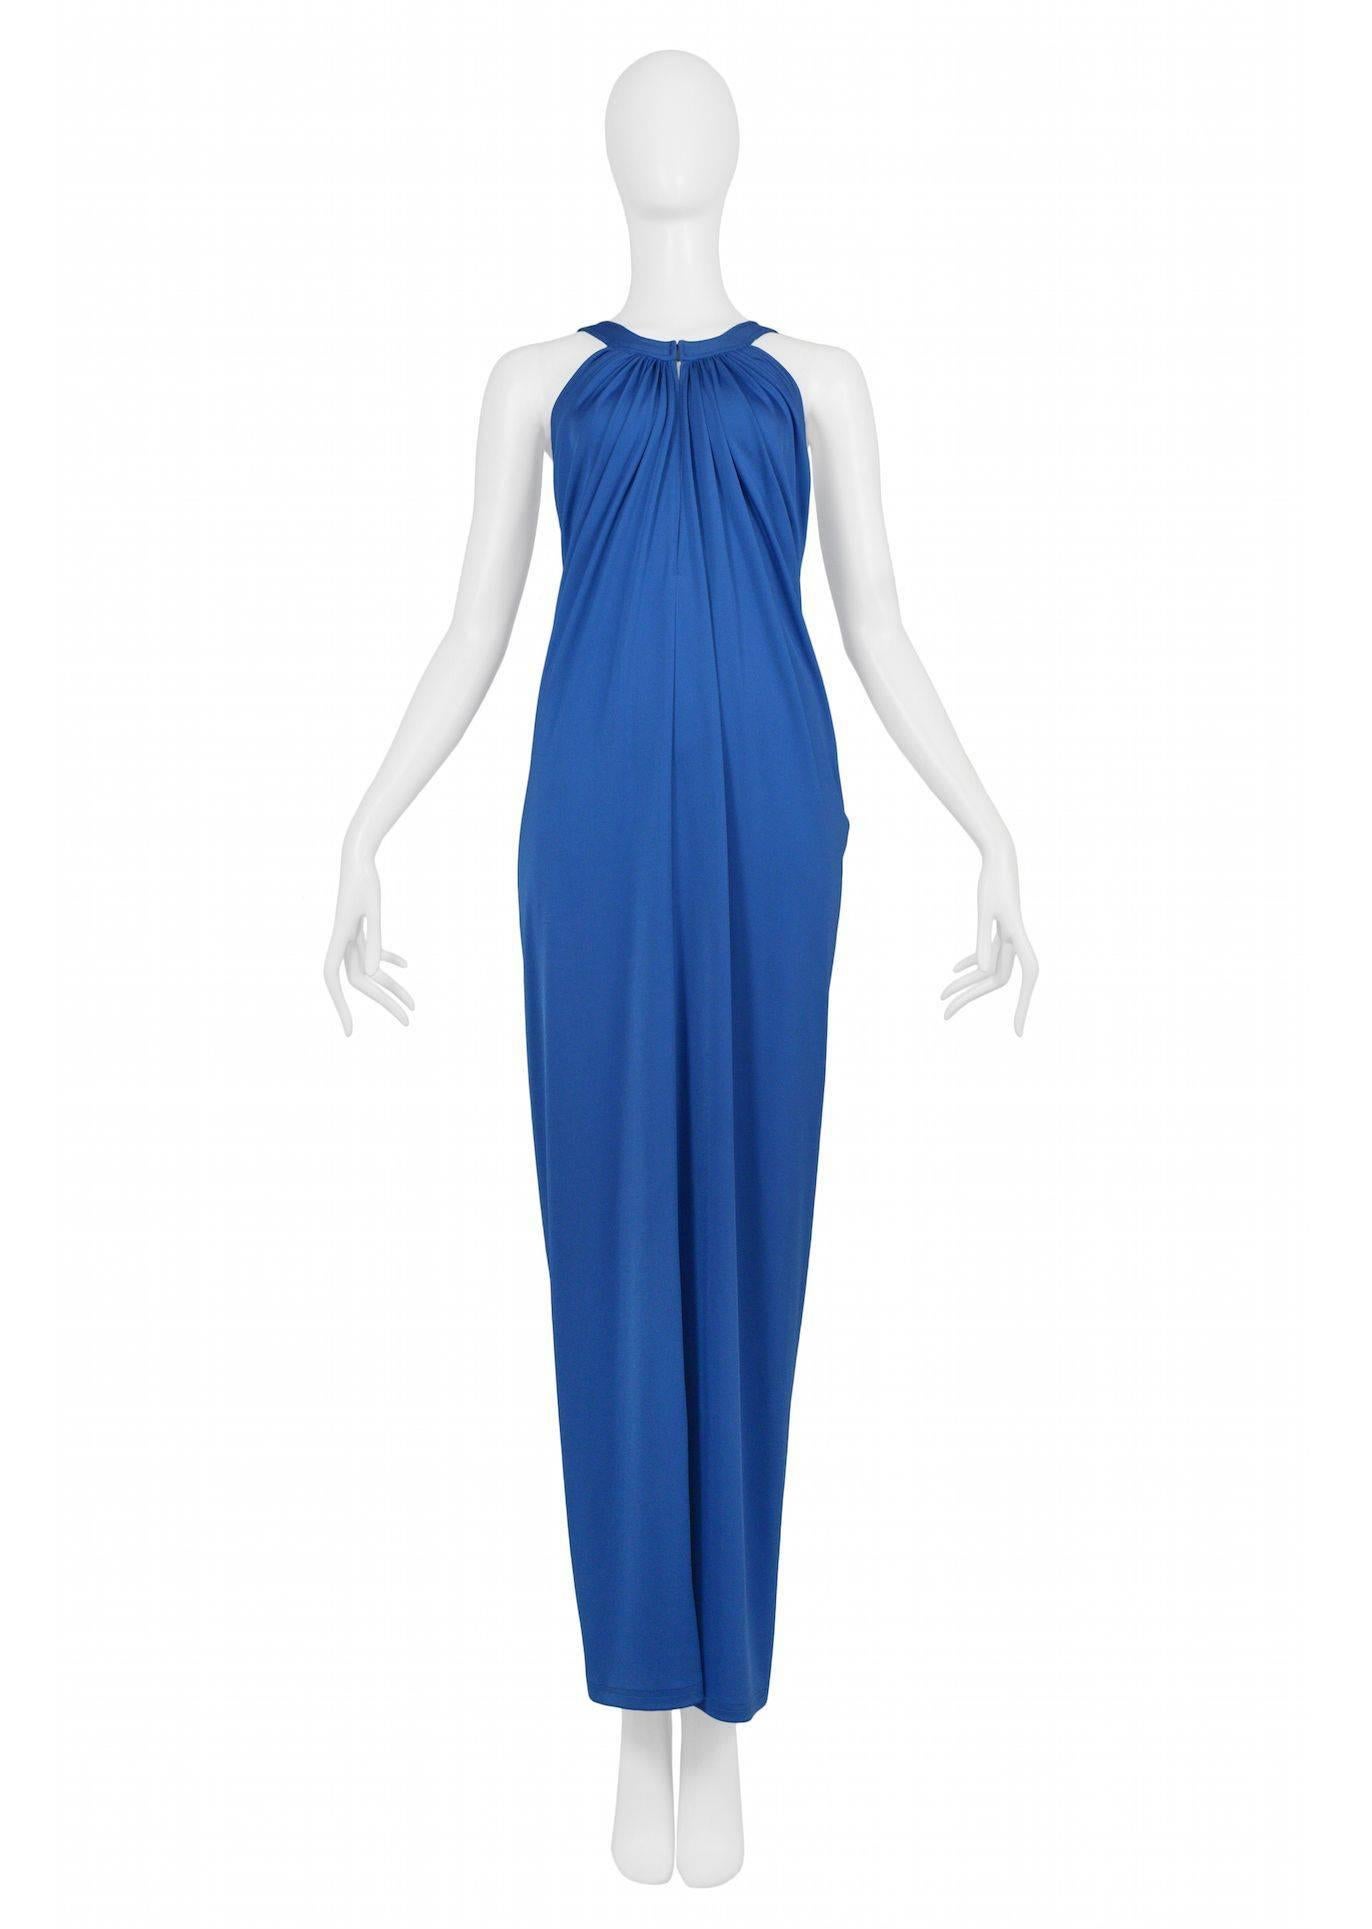 Vintage Yuki of London cobalt blue jersey evening gown with halter neckline, hook and eye closure at front, and heavy draping at back.

Excellent Vintage Condition.